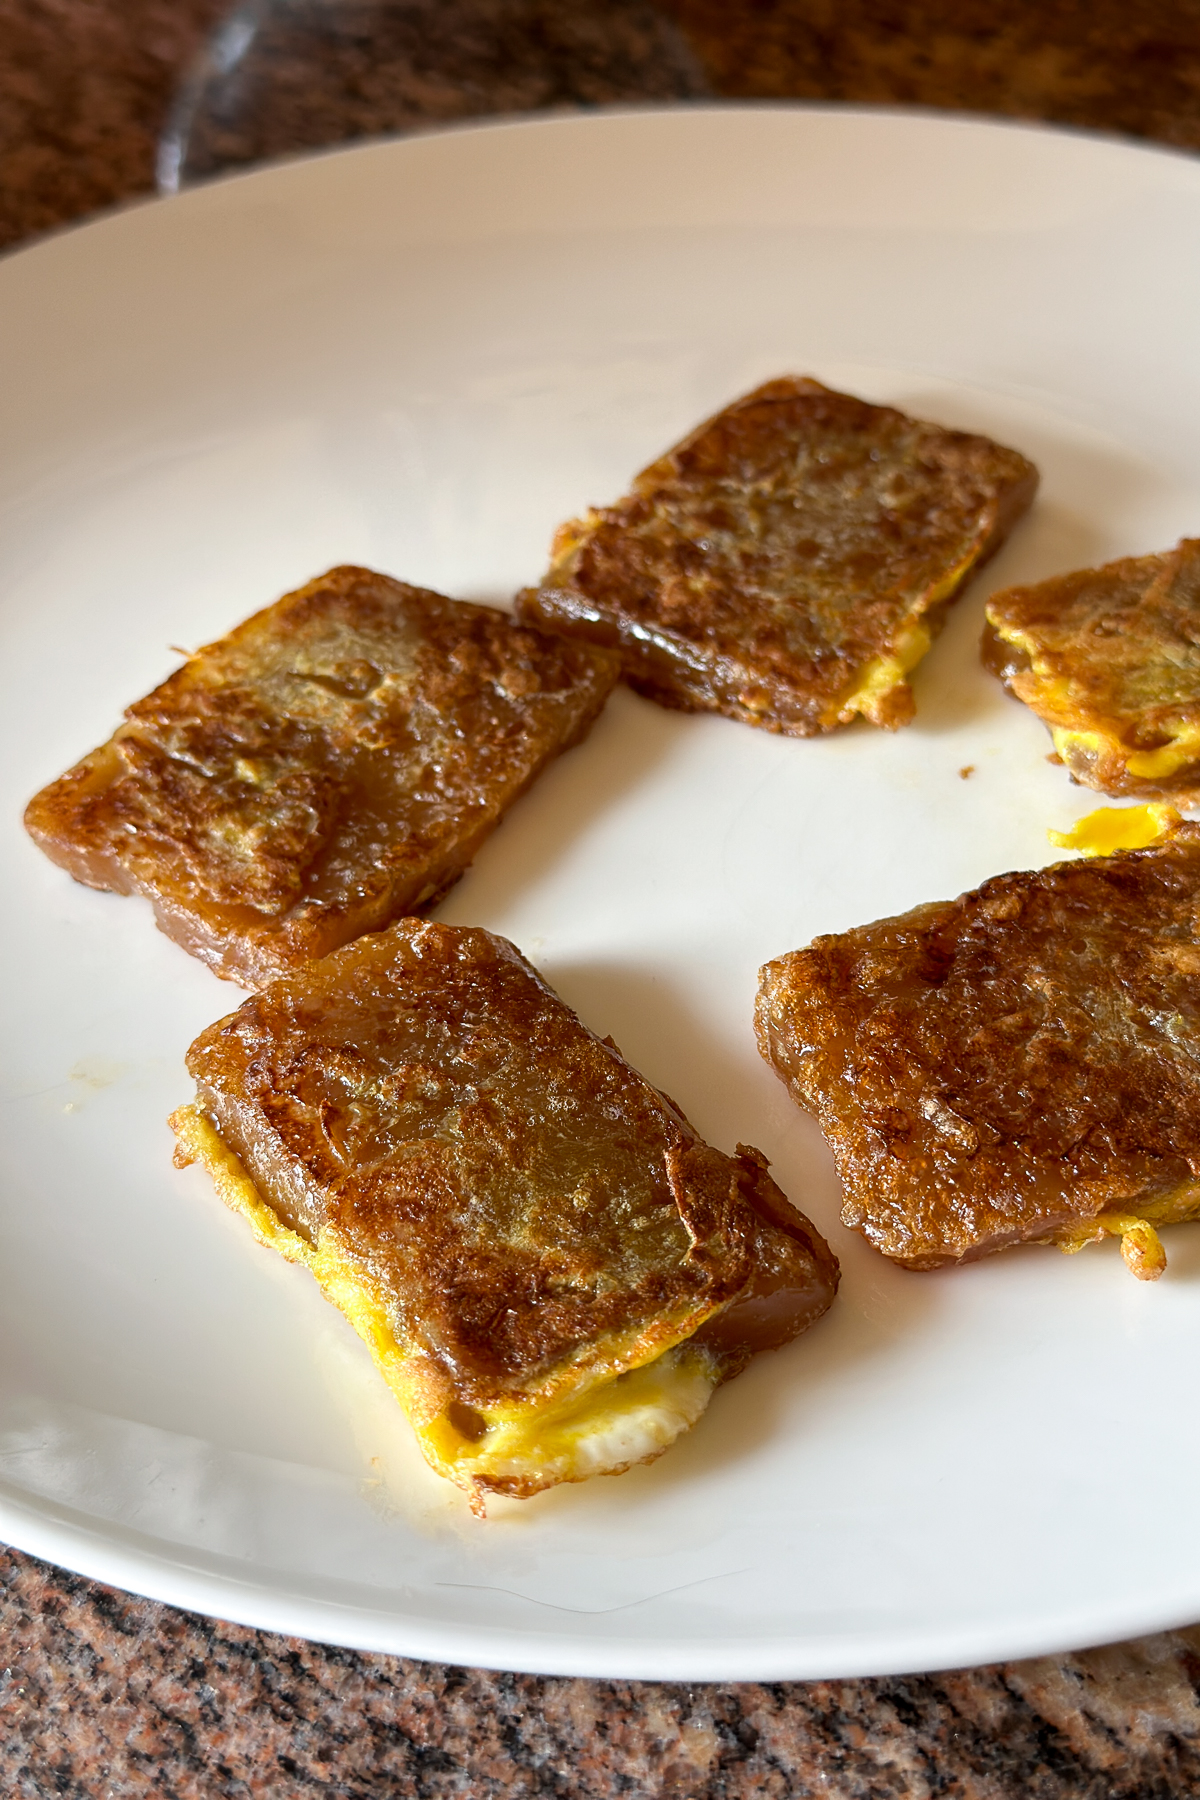 Pan Fried Nian Gao on a plate, ready to eat!